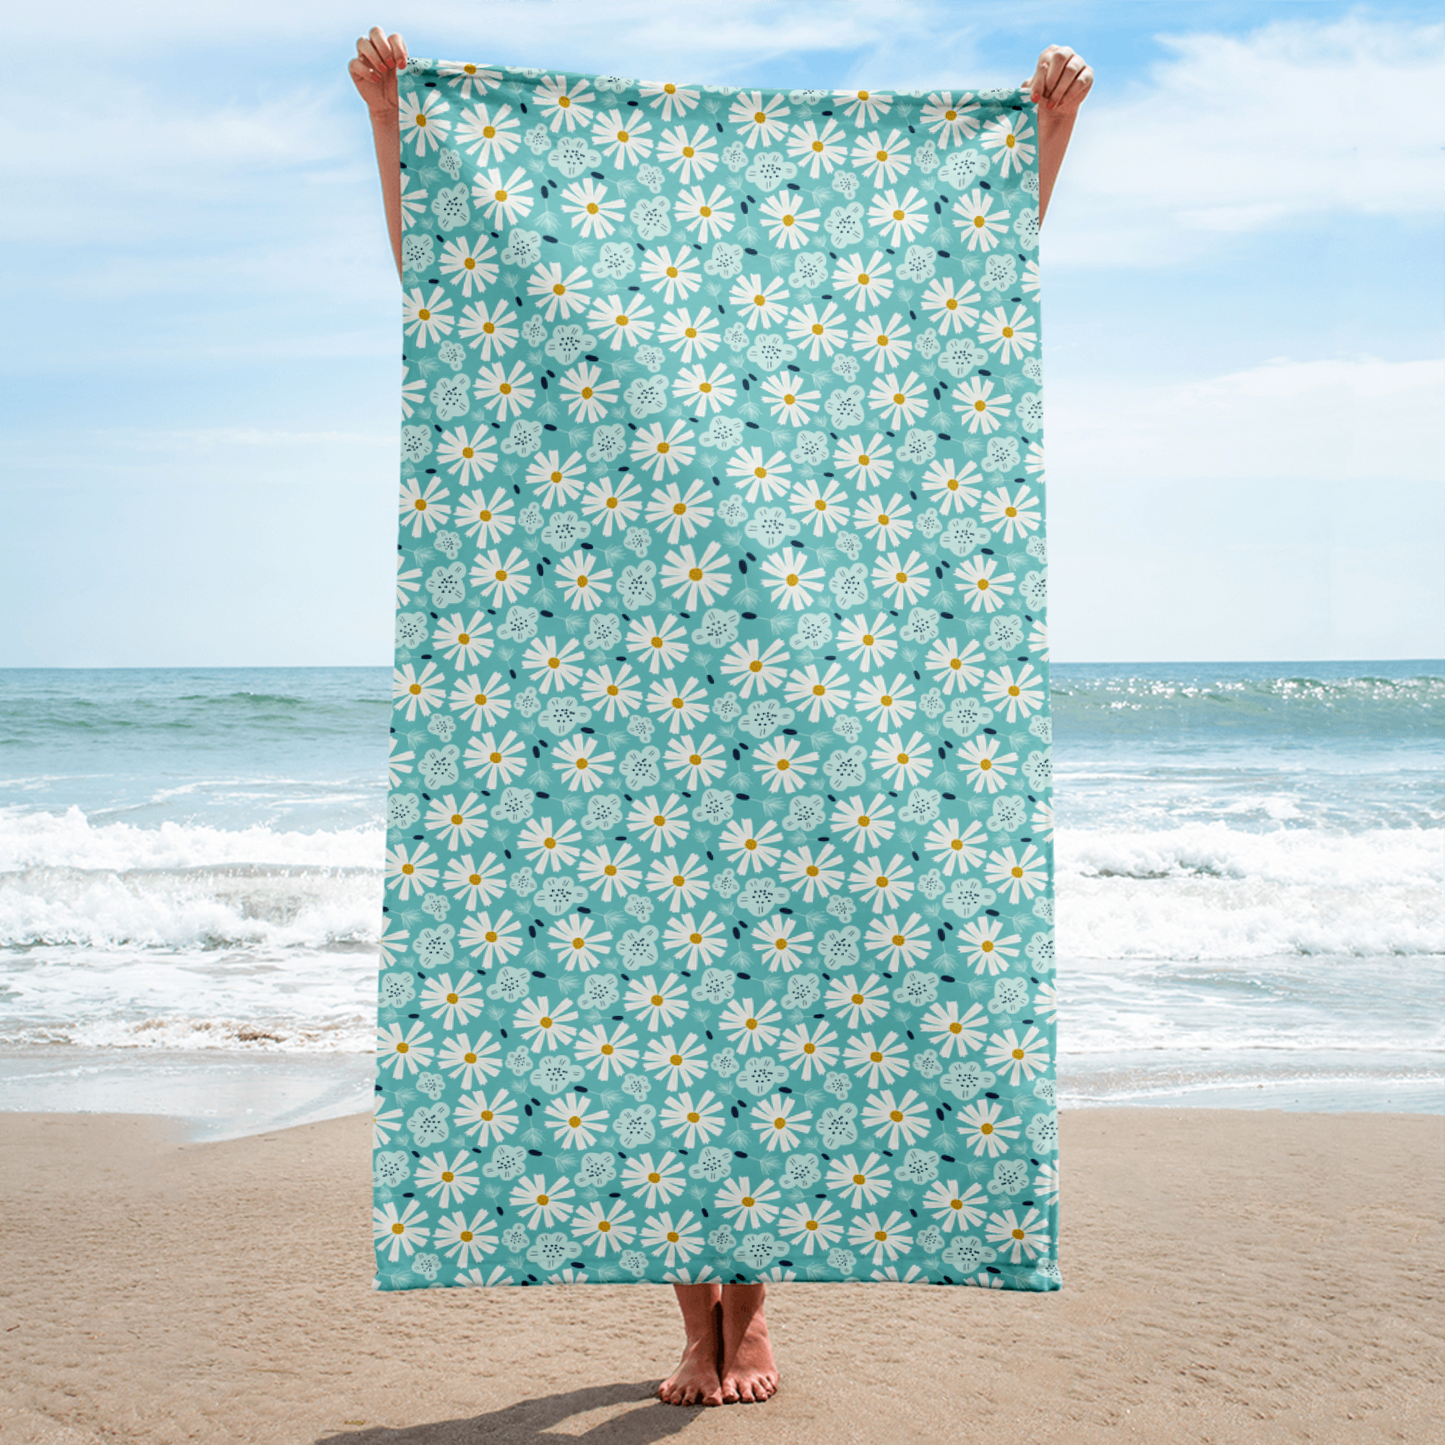 Scandinavian Spring Floral | Seamless Patterns | Sublimated Towel - #10